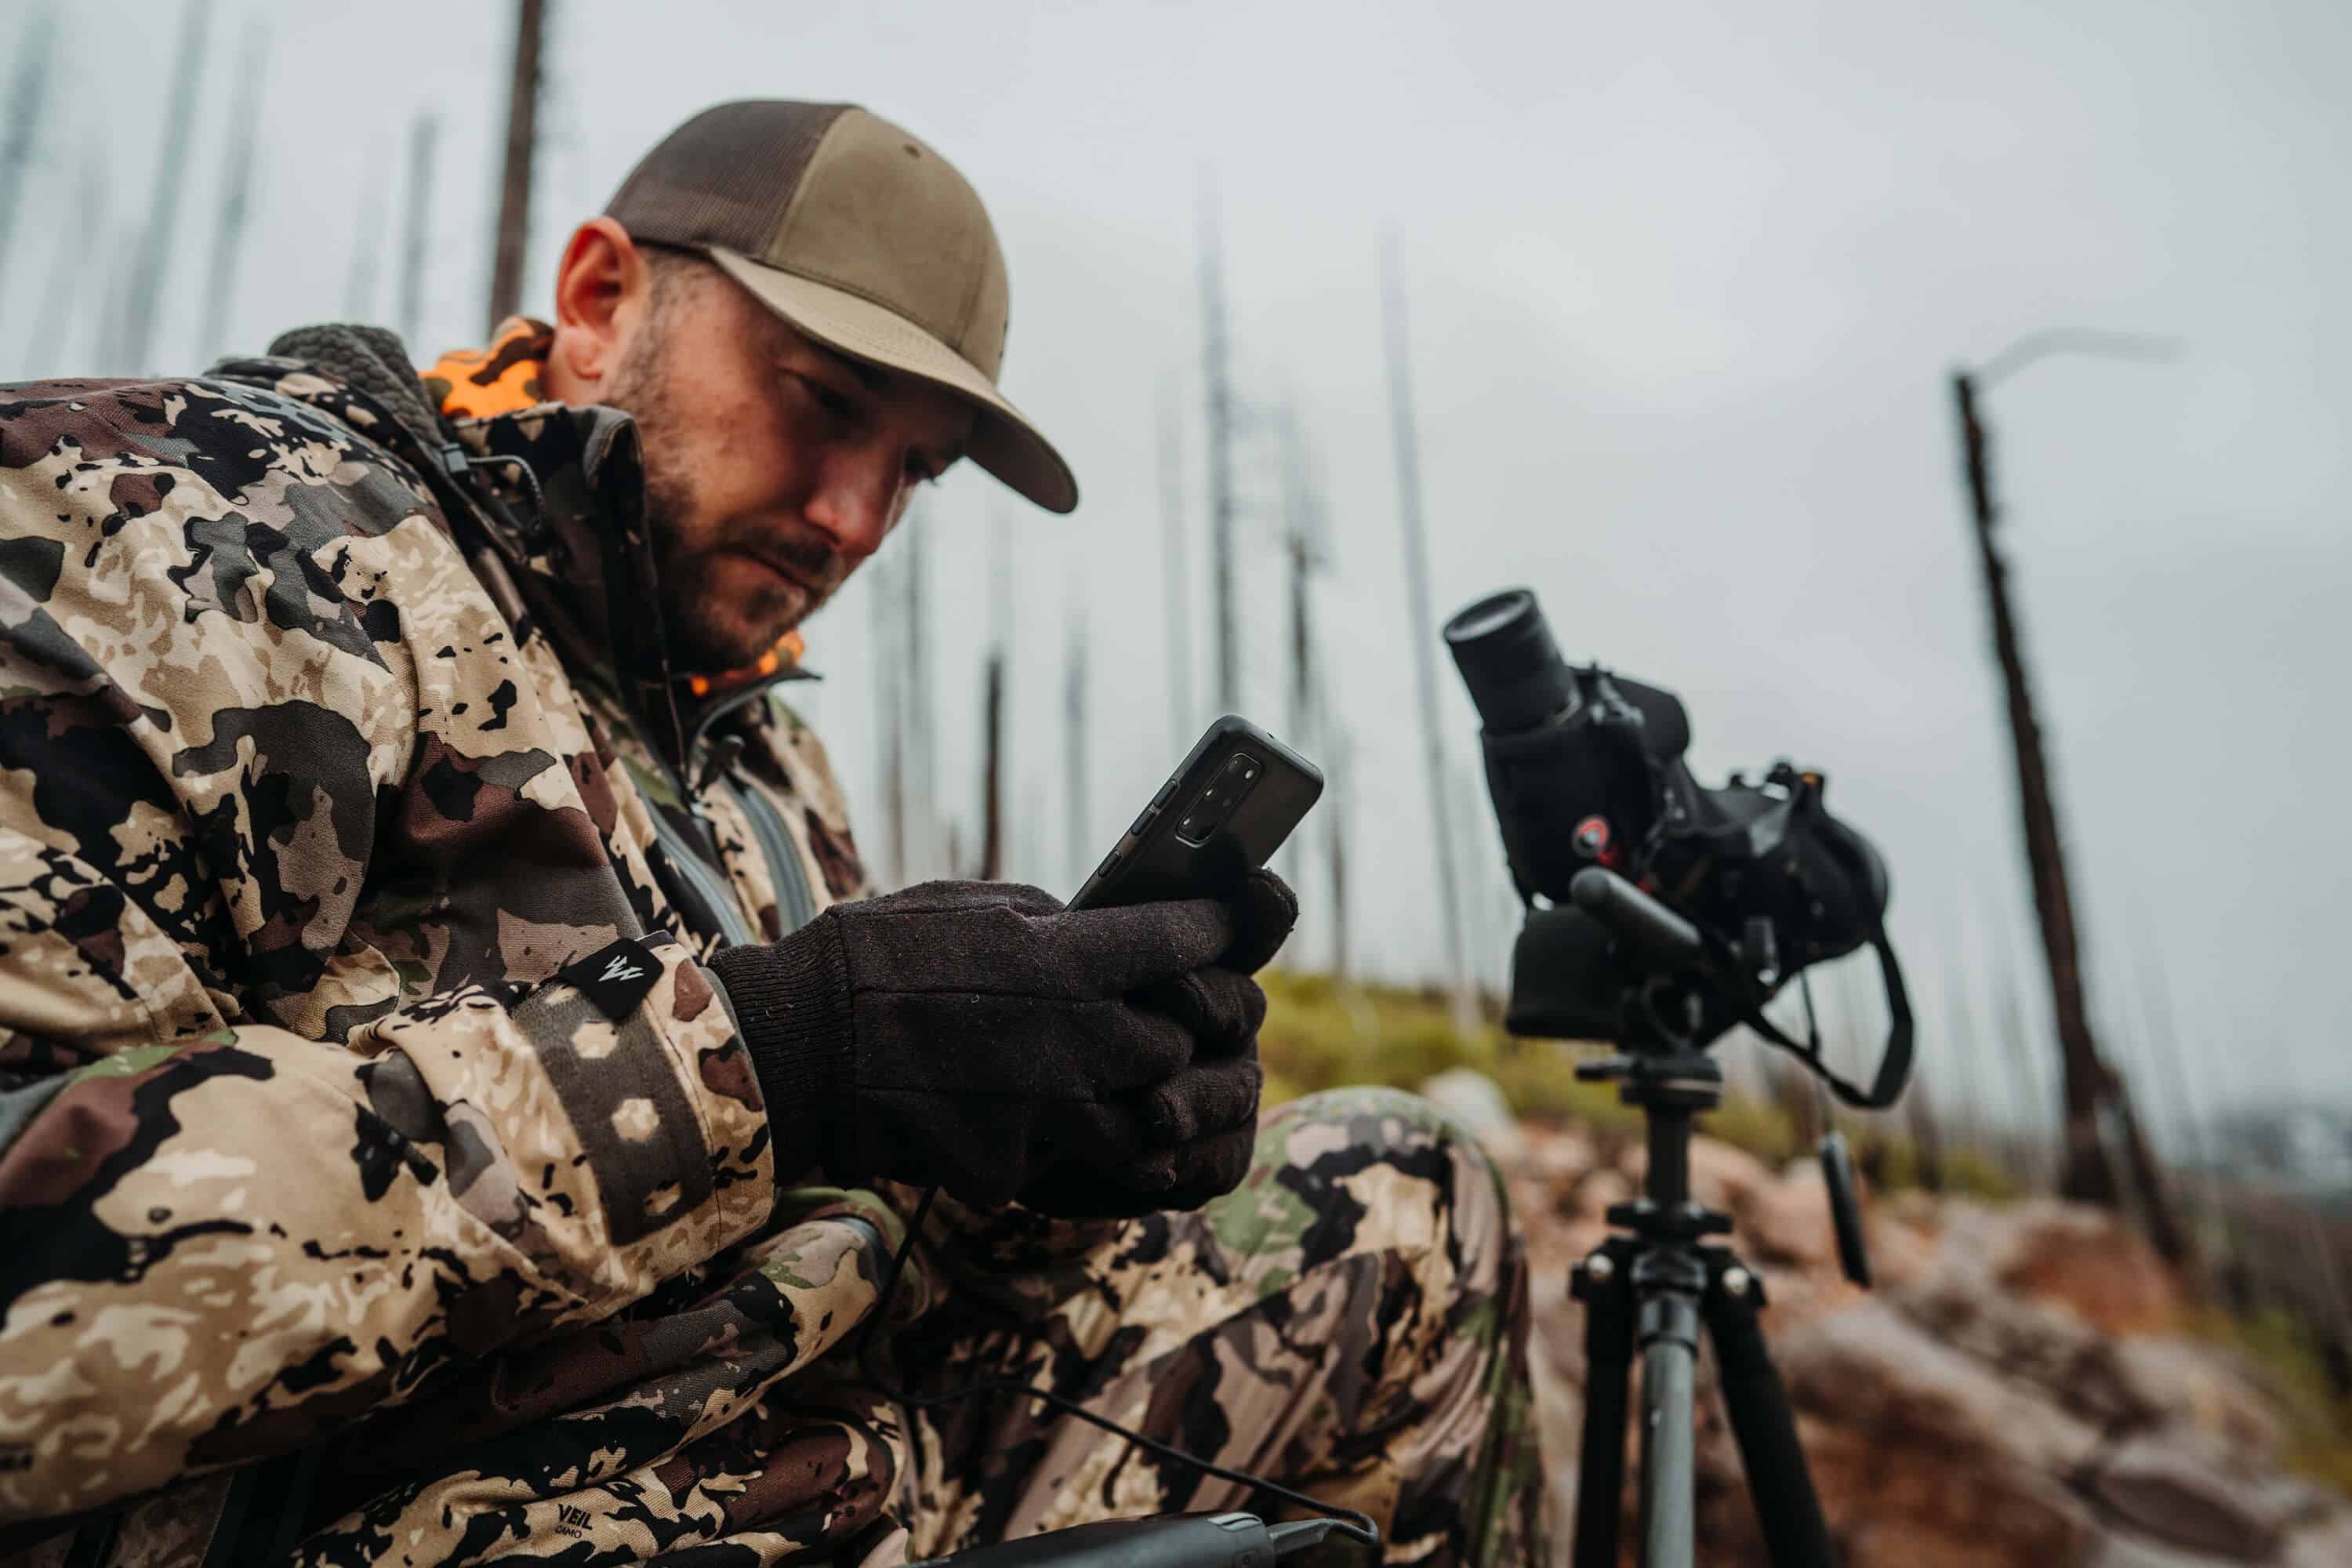 As you explore, you inevitably use your optics to scan ahead for deer and another shed antler. Each time bouncing deer tails appear ahead or you encounter herds already standing in openings, do a quick count. Make notes on how many deer you see at various locations stamped with time and date.